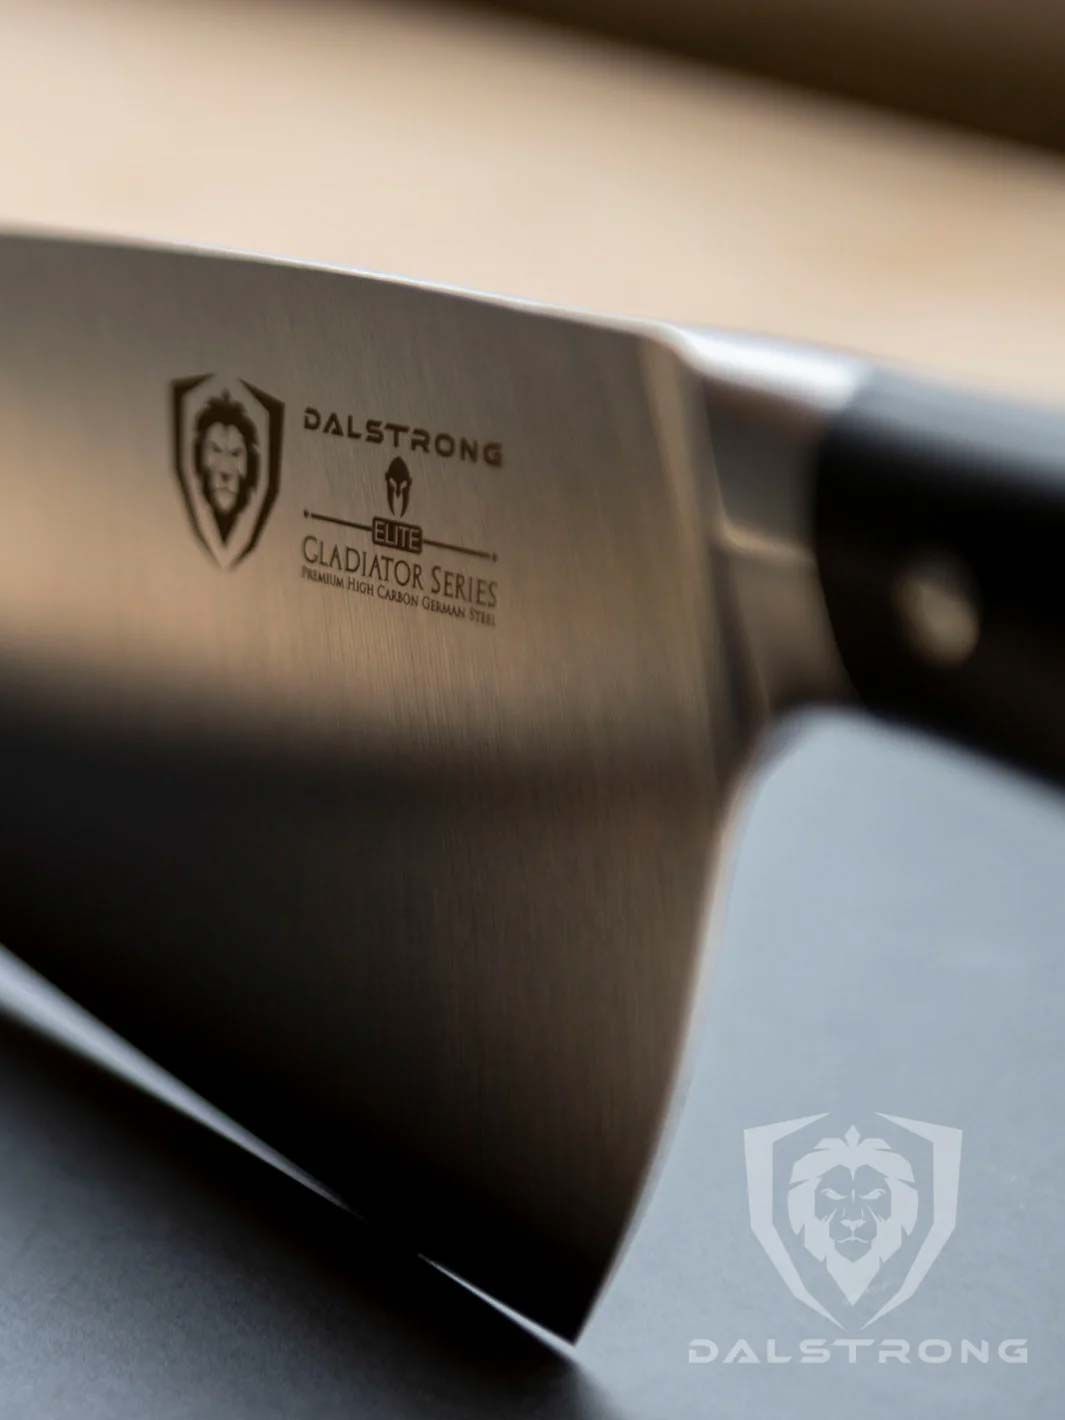 Dalstrong gladiator series 10 inch cleaver knife with black handle showcasing it's series and dalstrong logo.